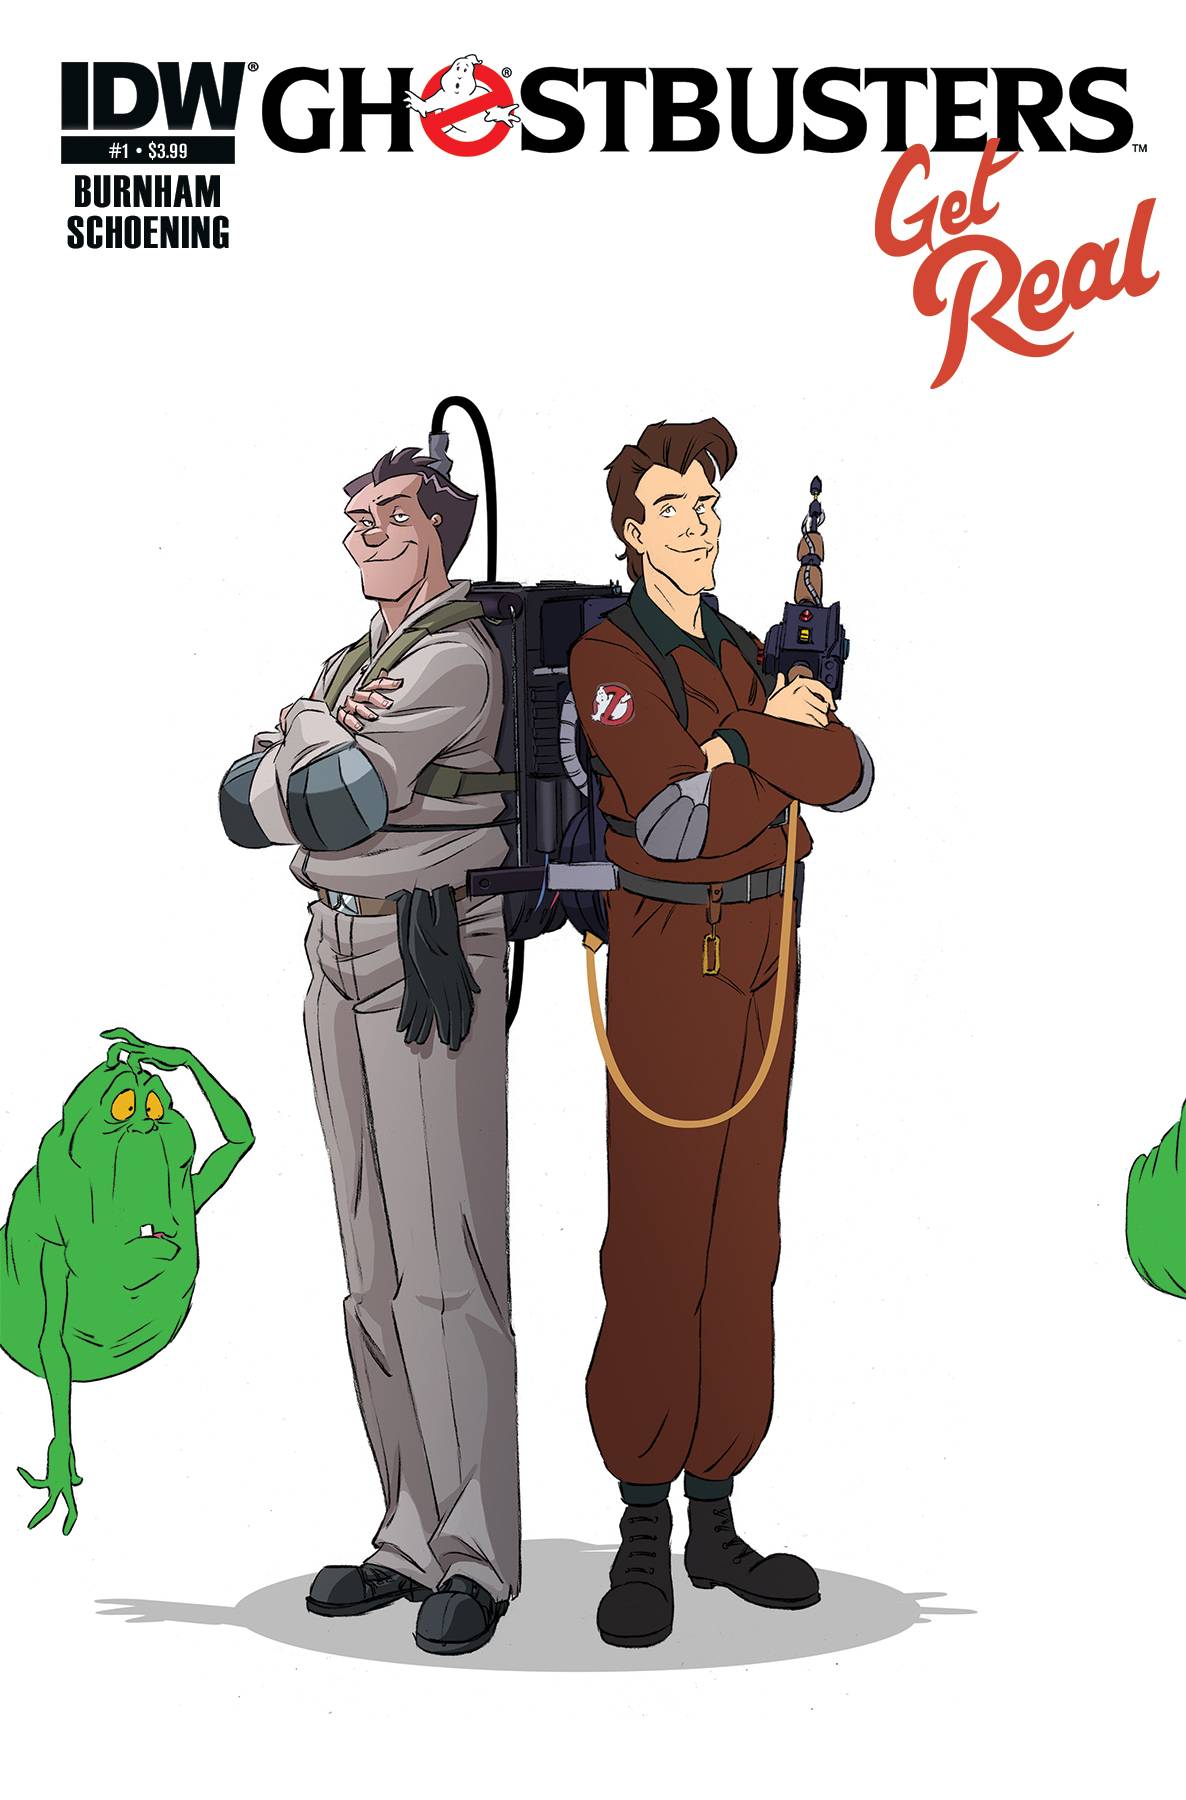 Ghostbusters get real